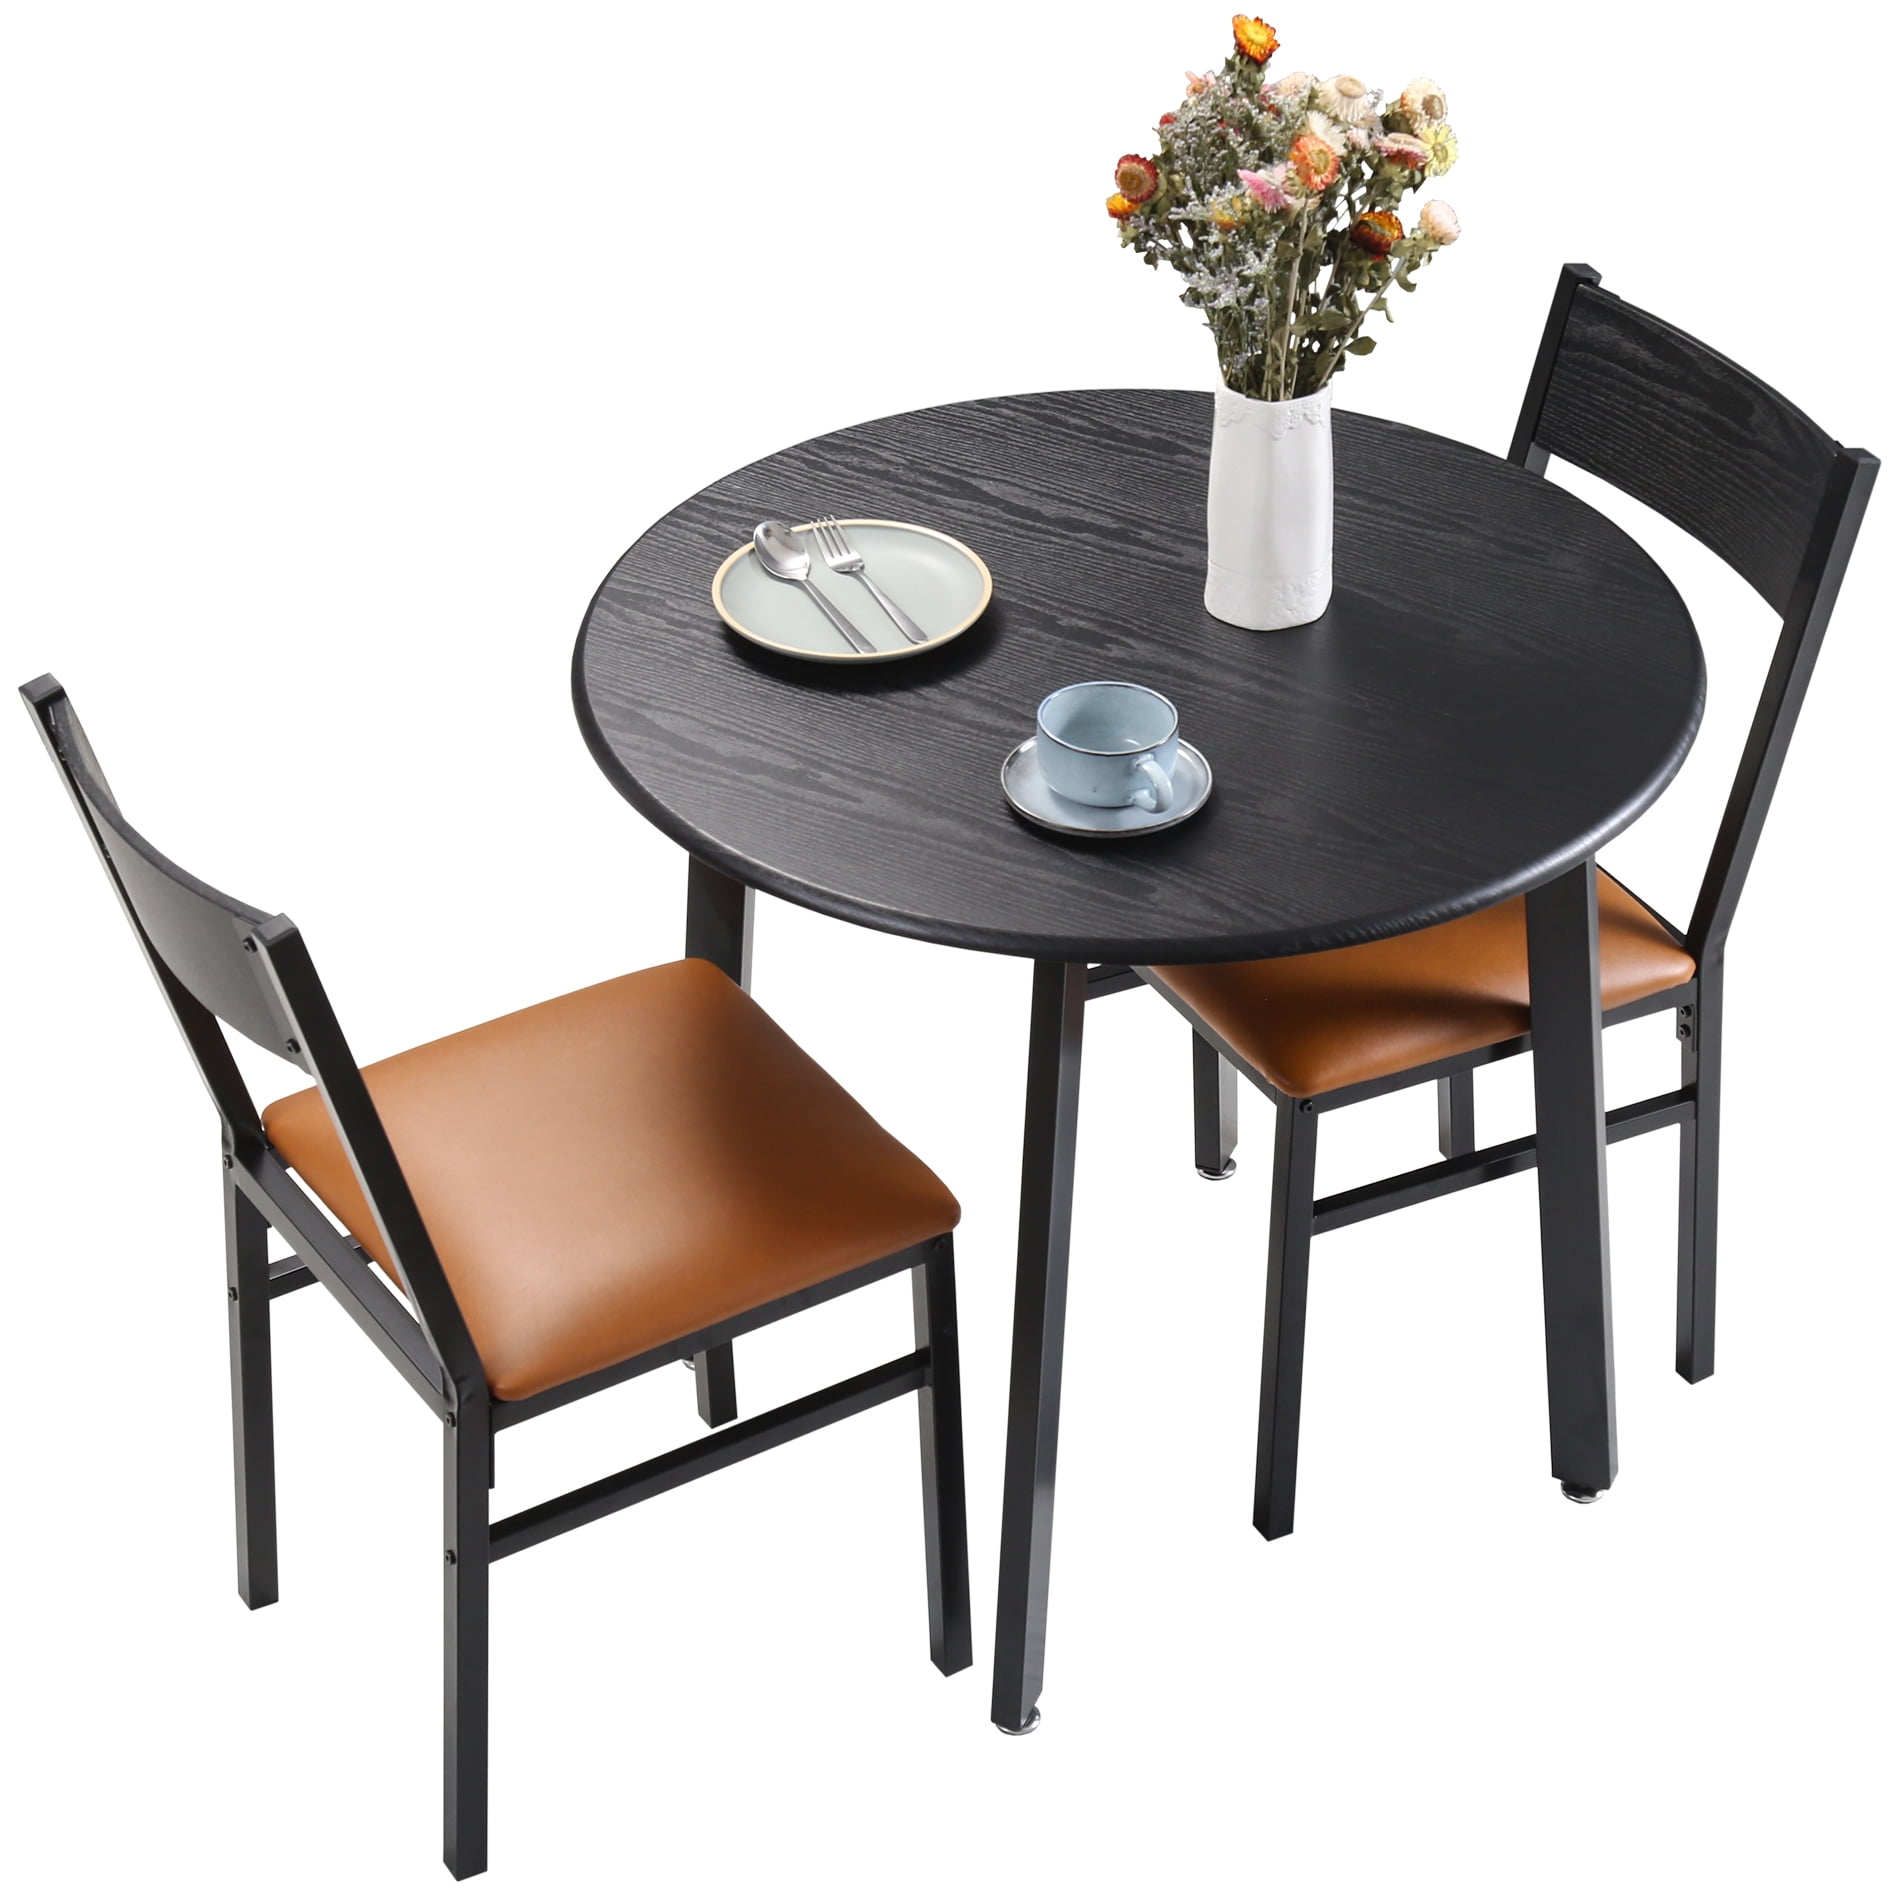 3 Piece Round Dining Table Set With, Small Round Kitchen Table Chairs